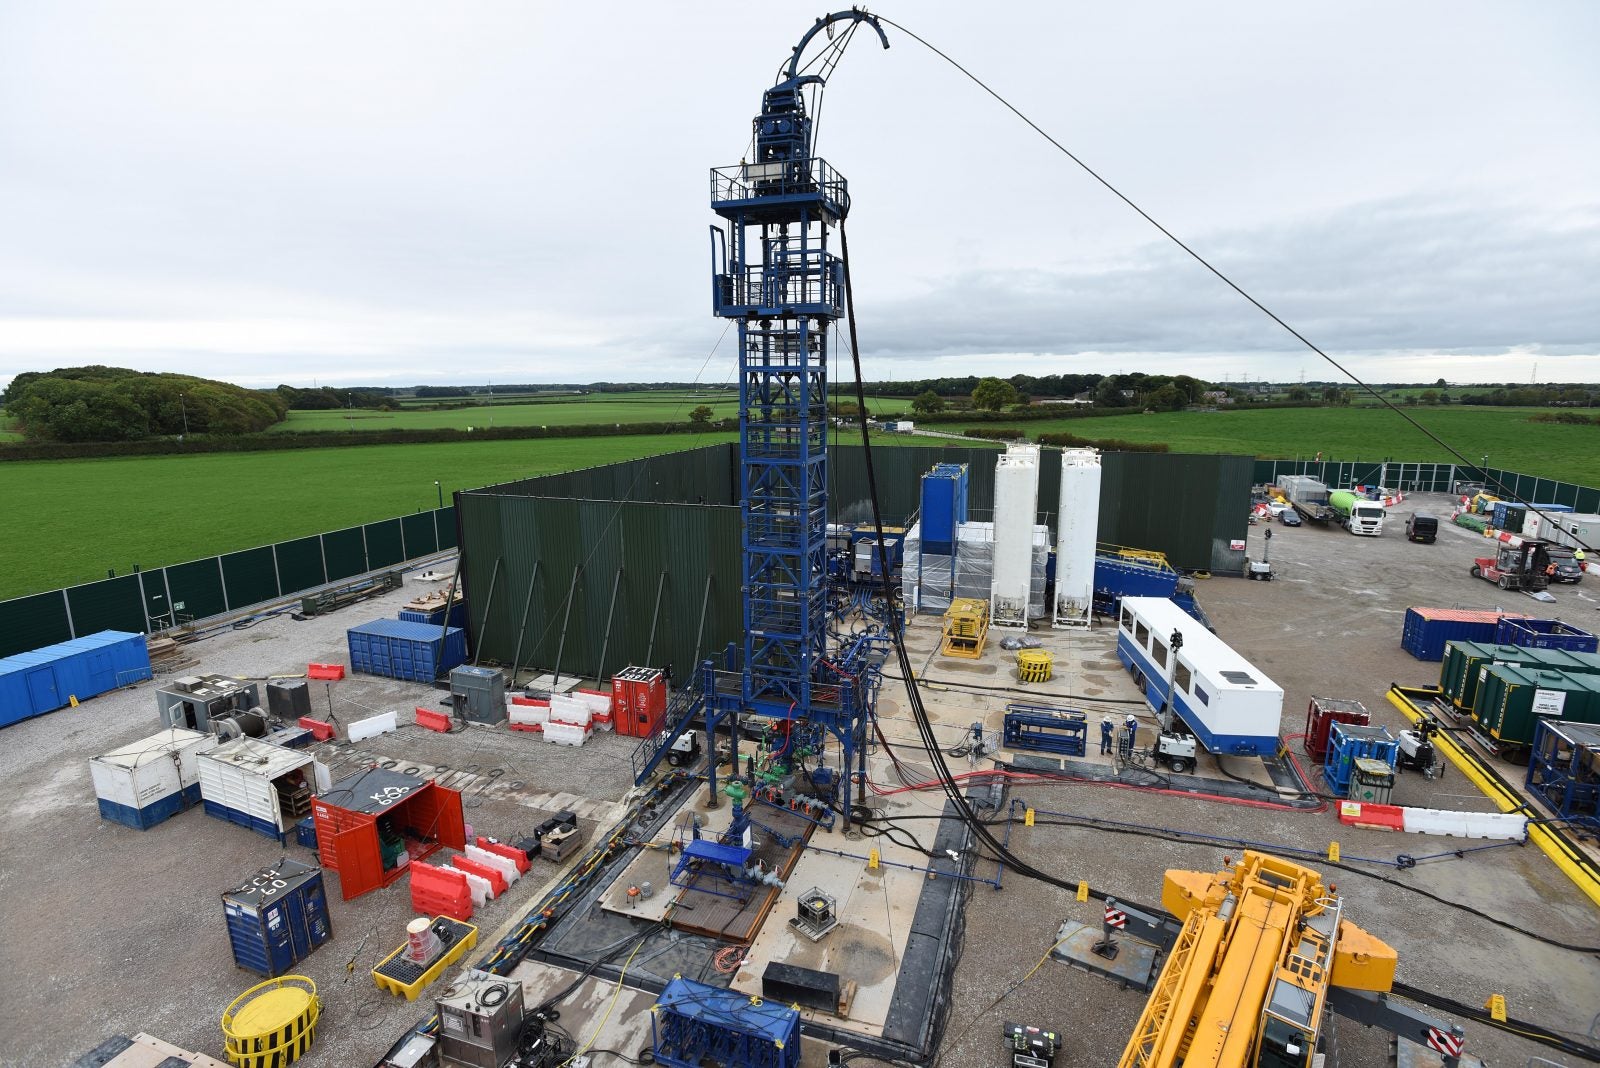 Whether to greenlight fracking is one of the decisions that the government will need to make. (Cuadrilla/PA)